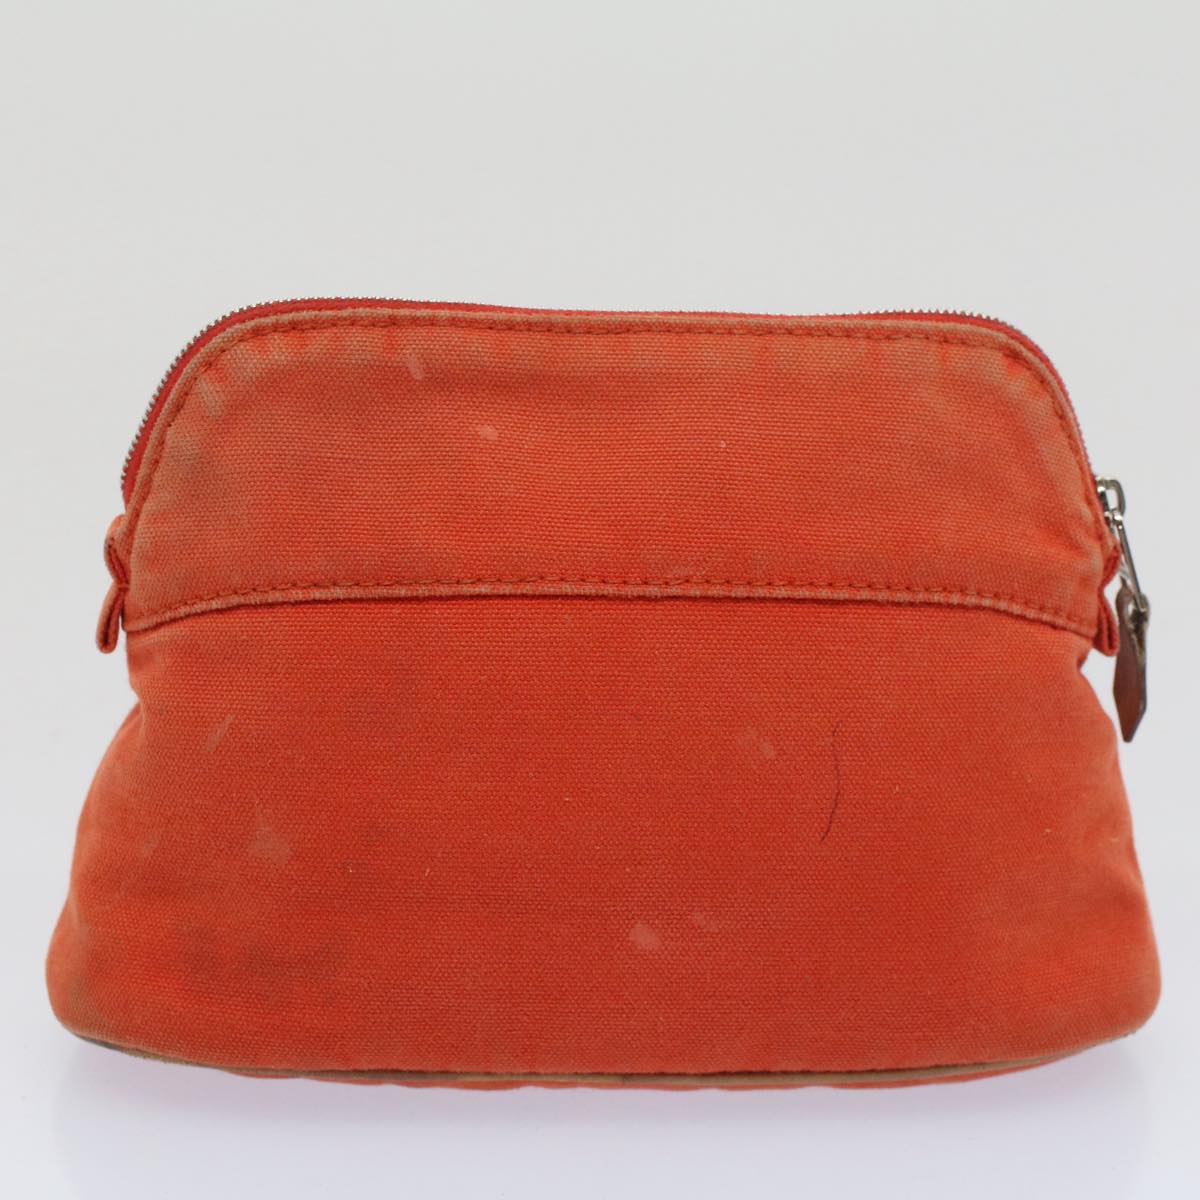 HERMES Pouch Canvas 2Set Red Orange Auth bs8117